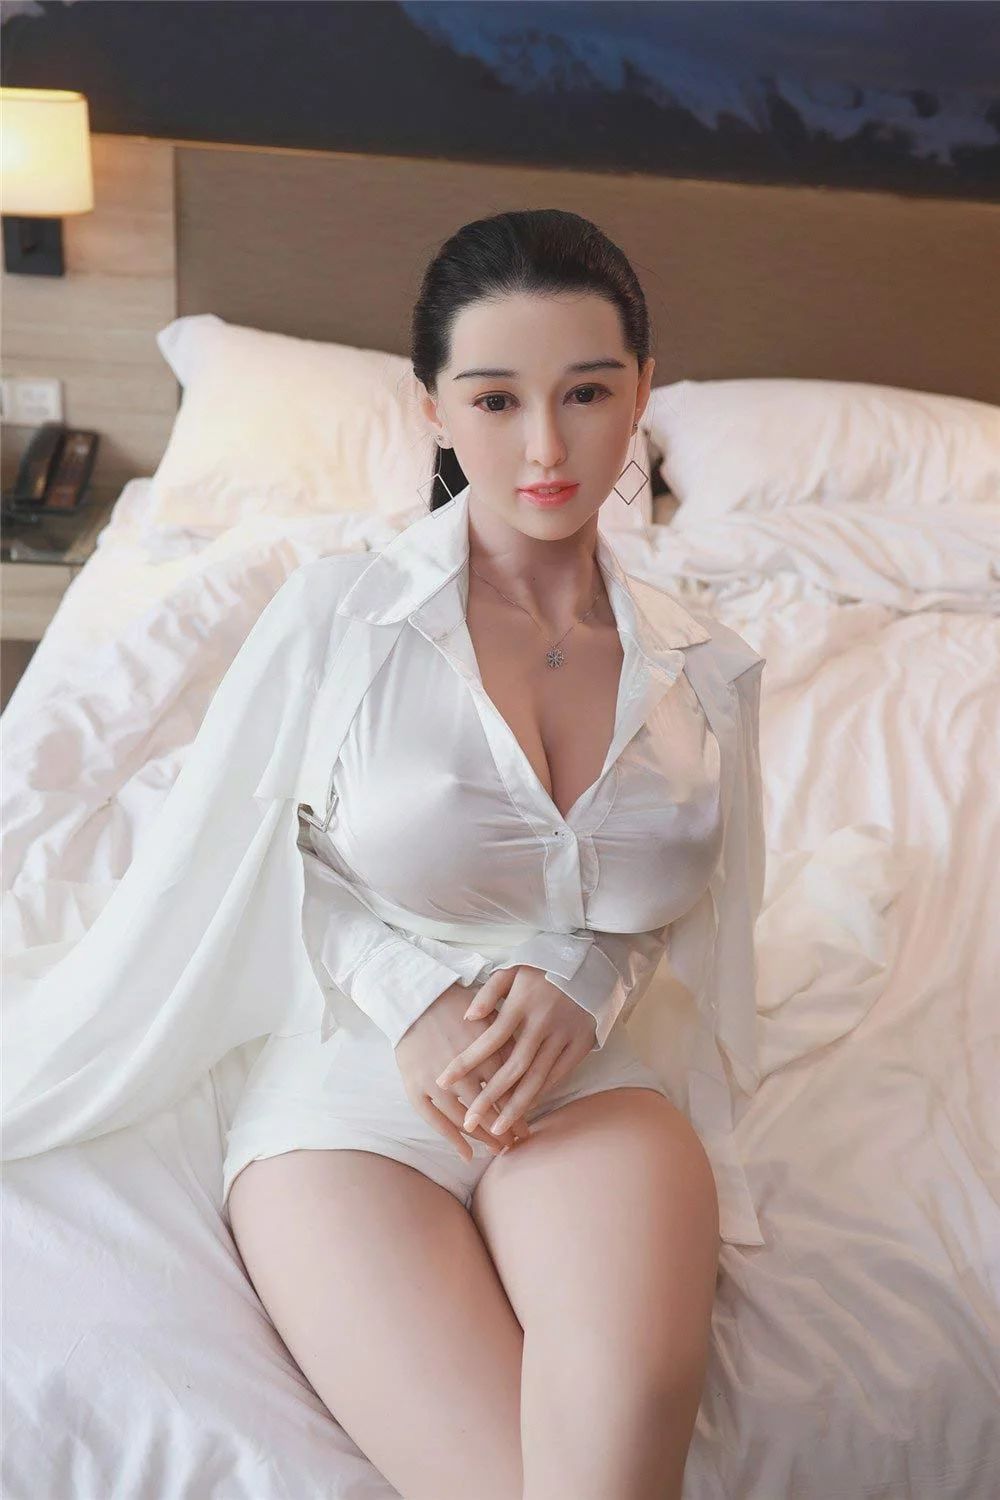 Sex doll in white shirt